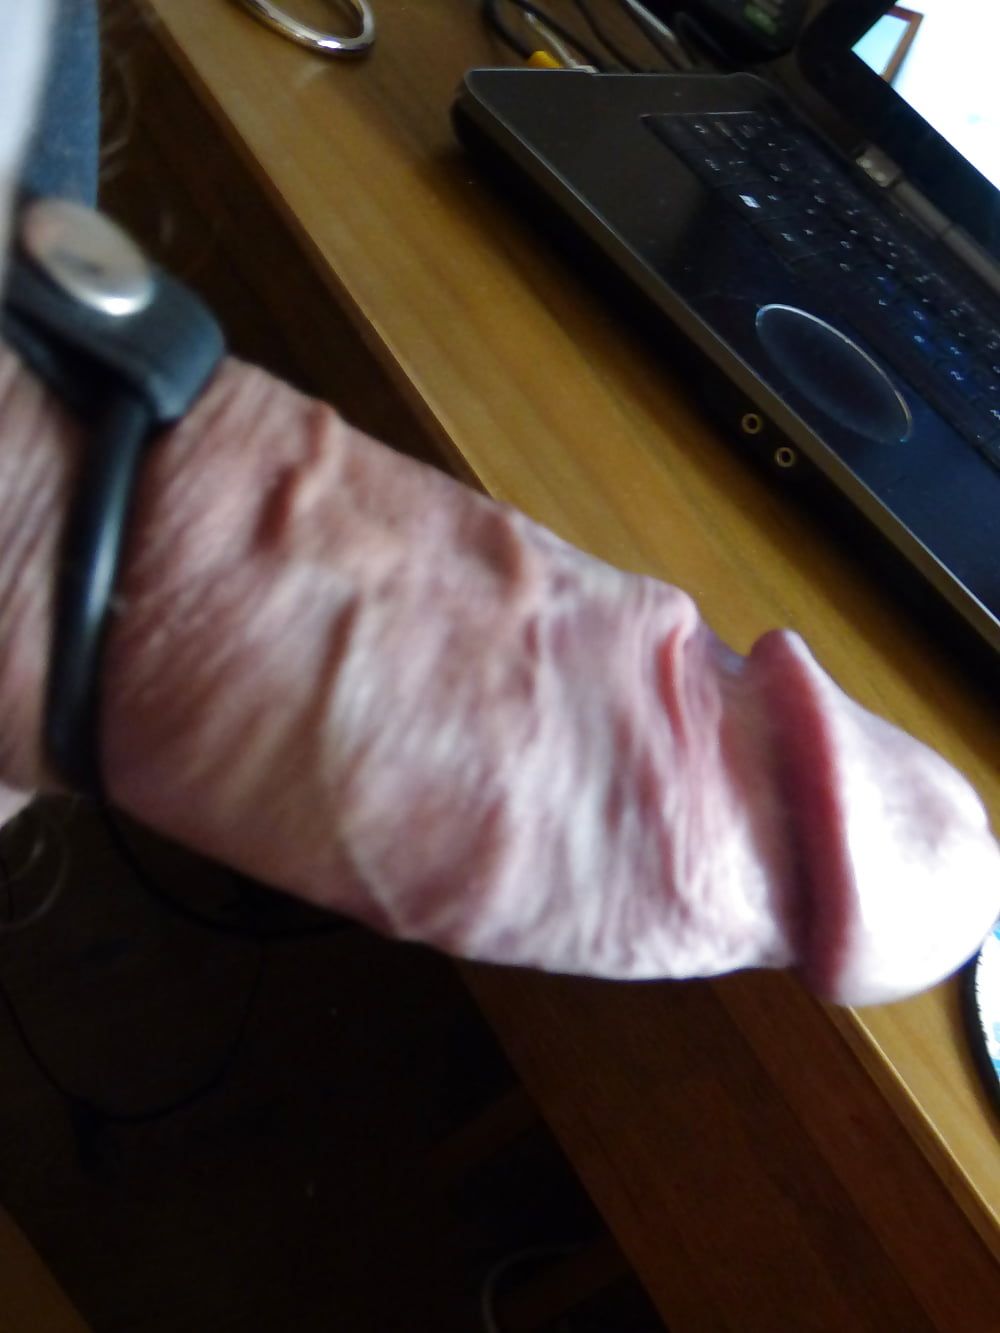 Thick 50 yr old cock, comment please #15